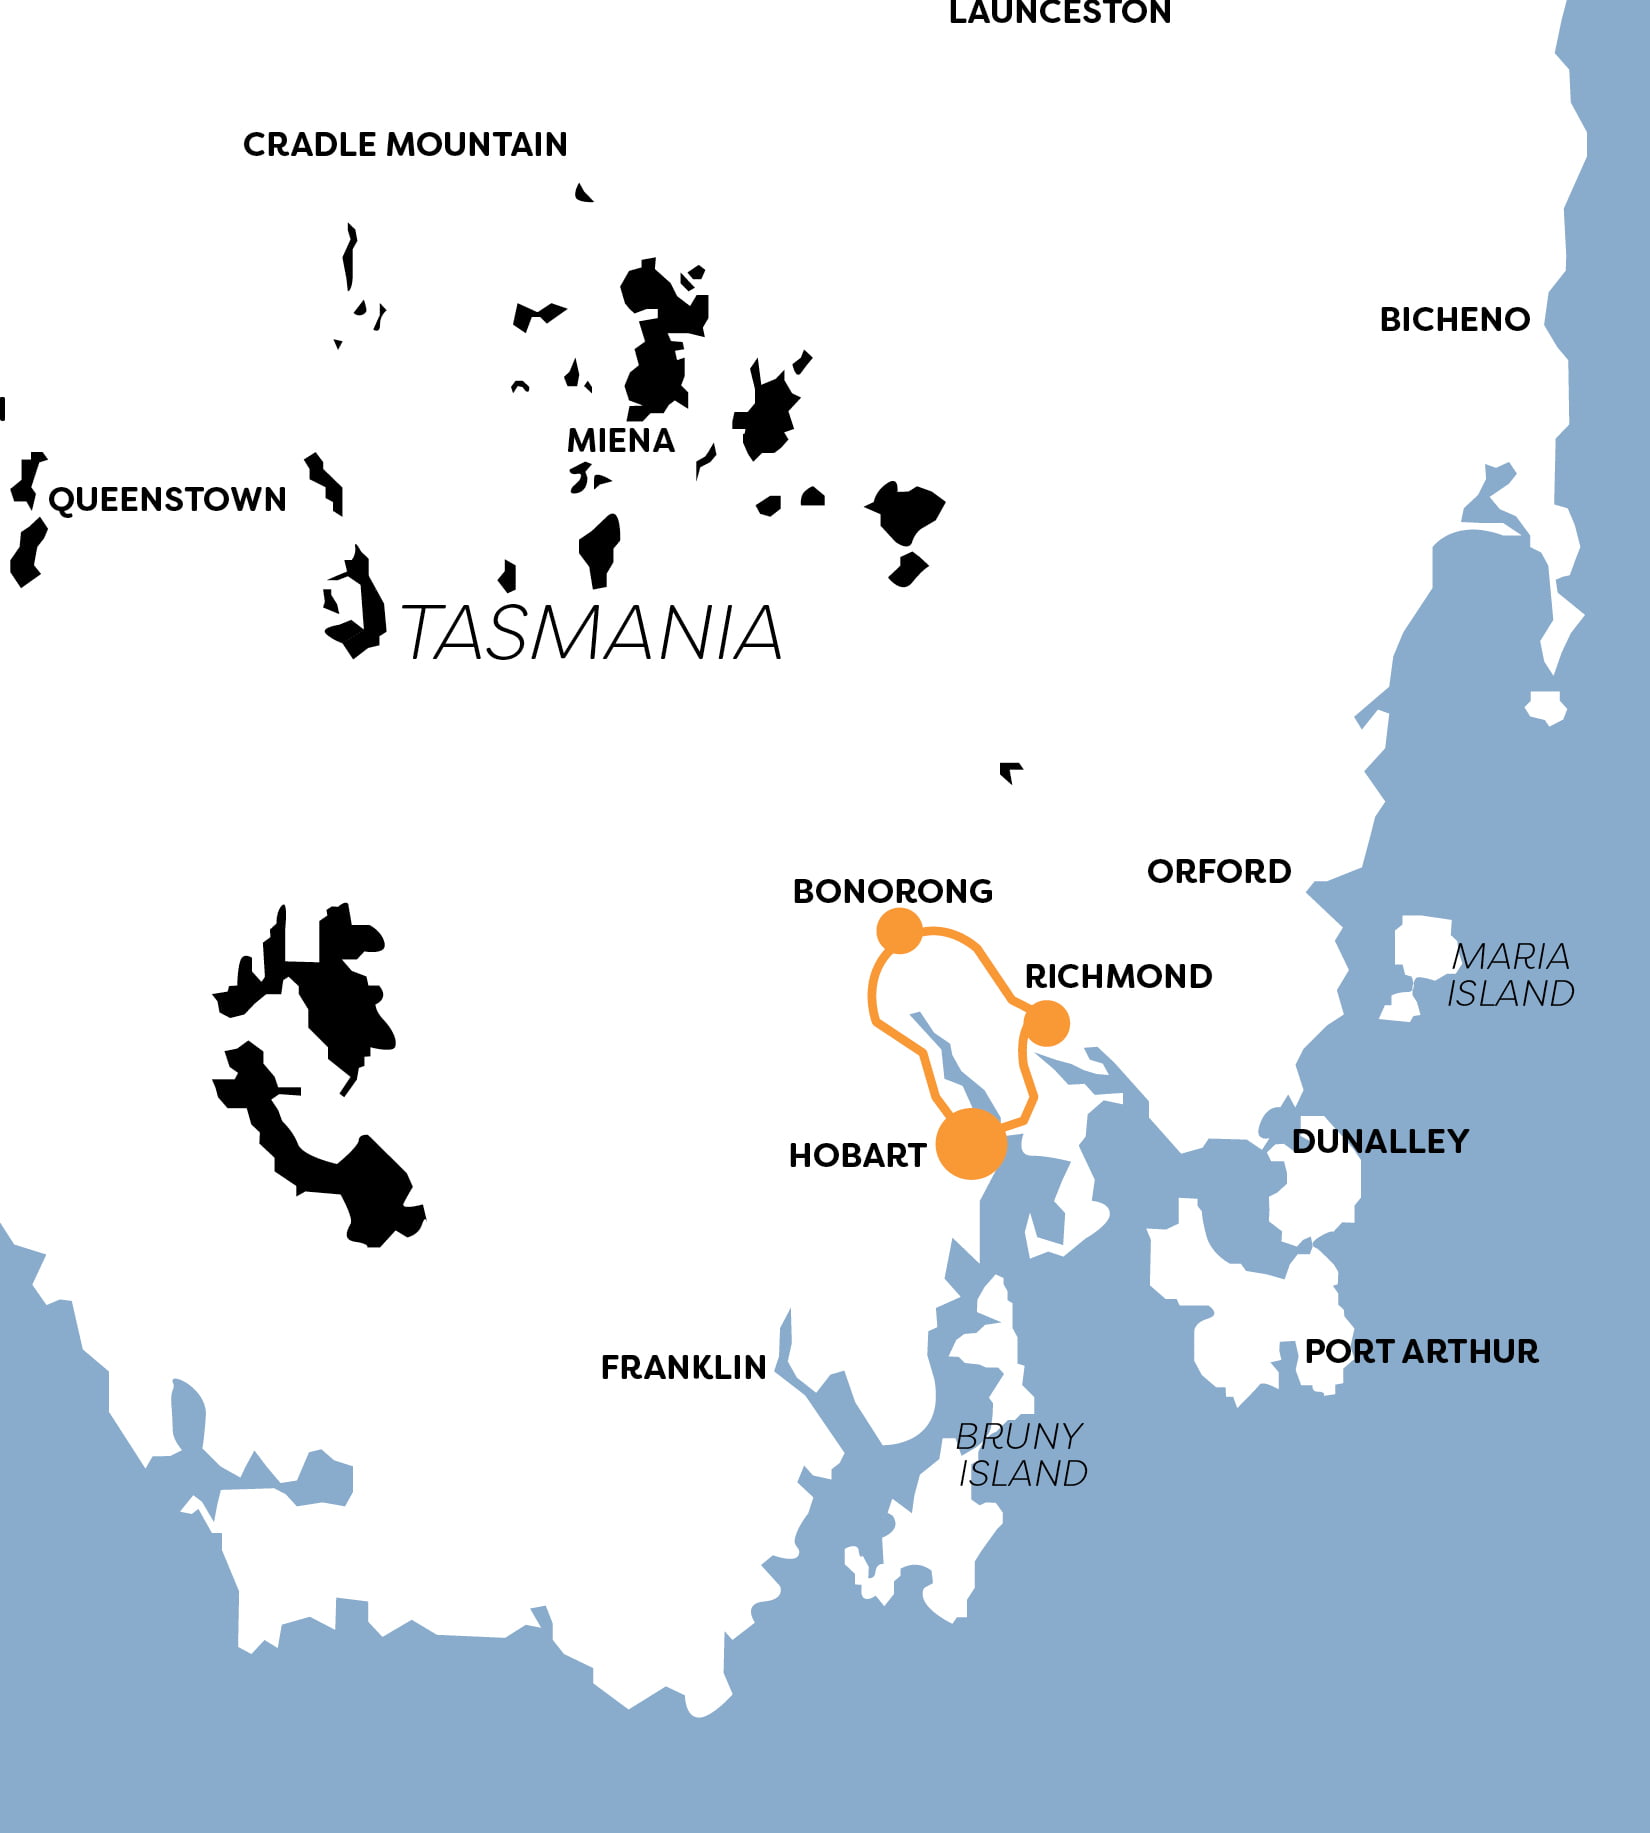 A map showing the destinations of Richmond and Bonorong